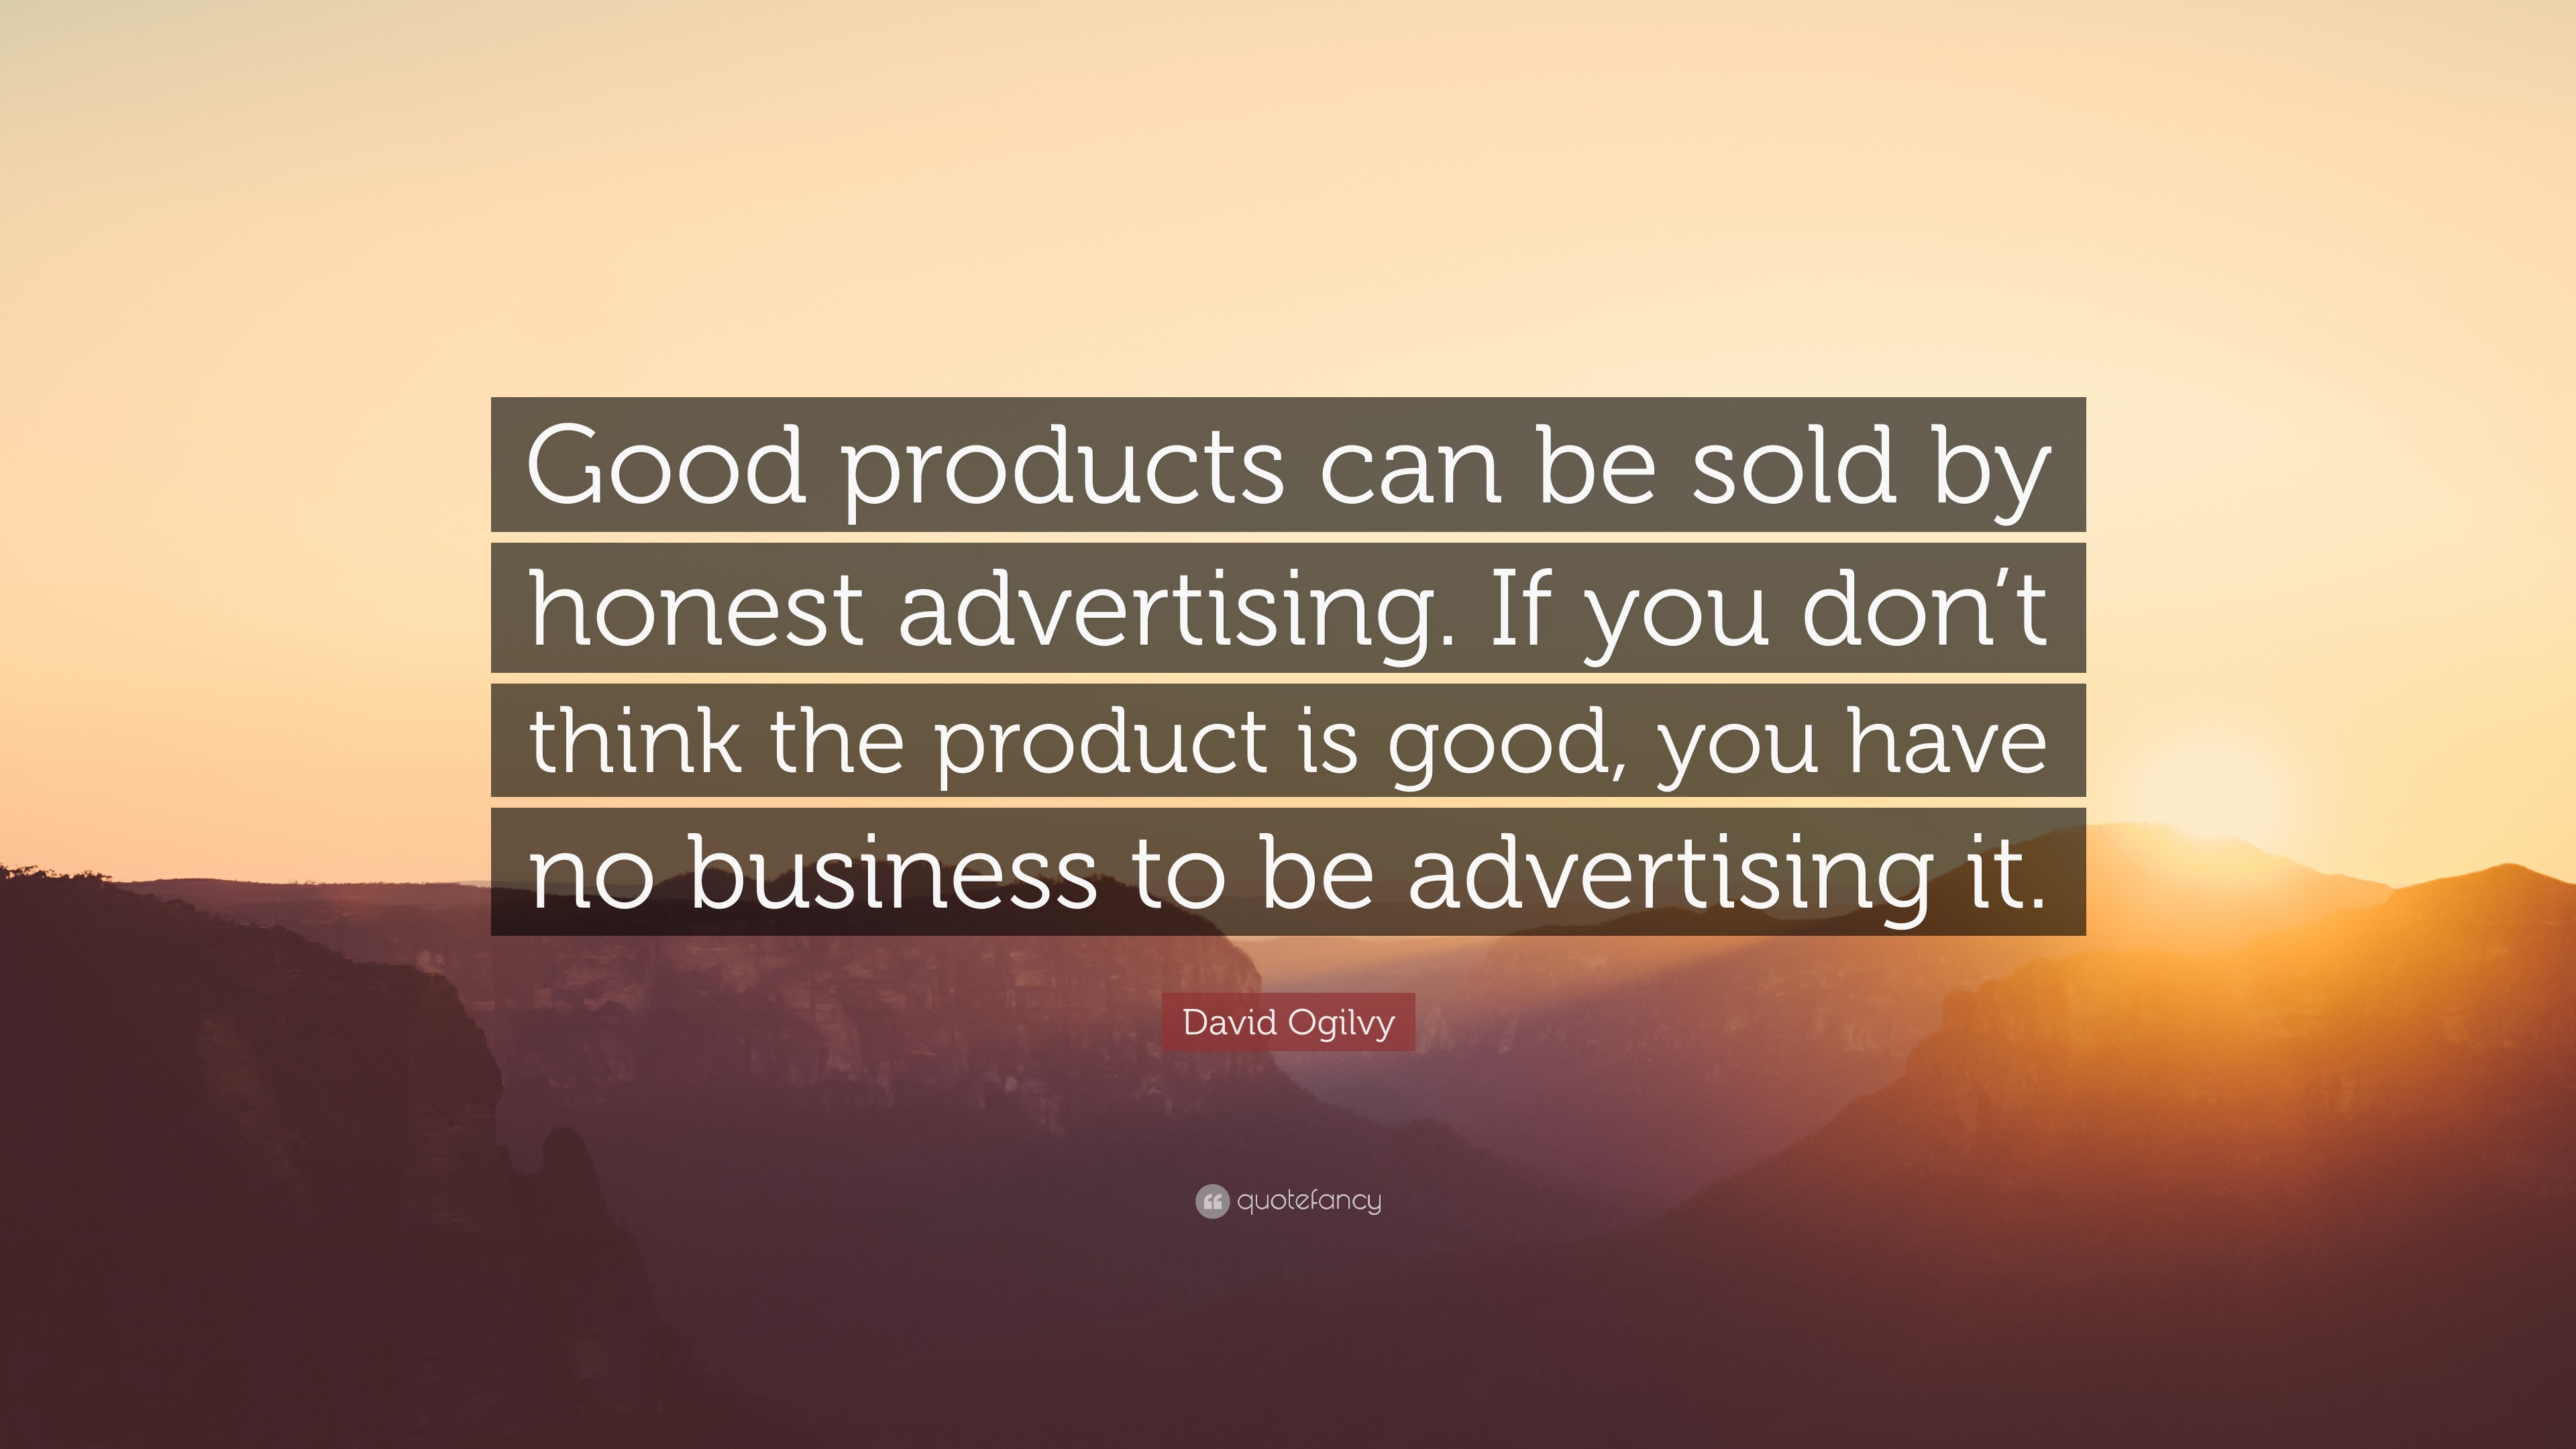 David Ogilvy Quote: "Good products can be sold by honest ...